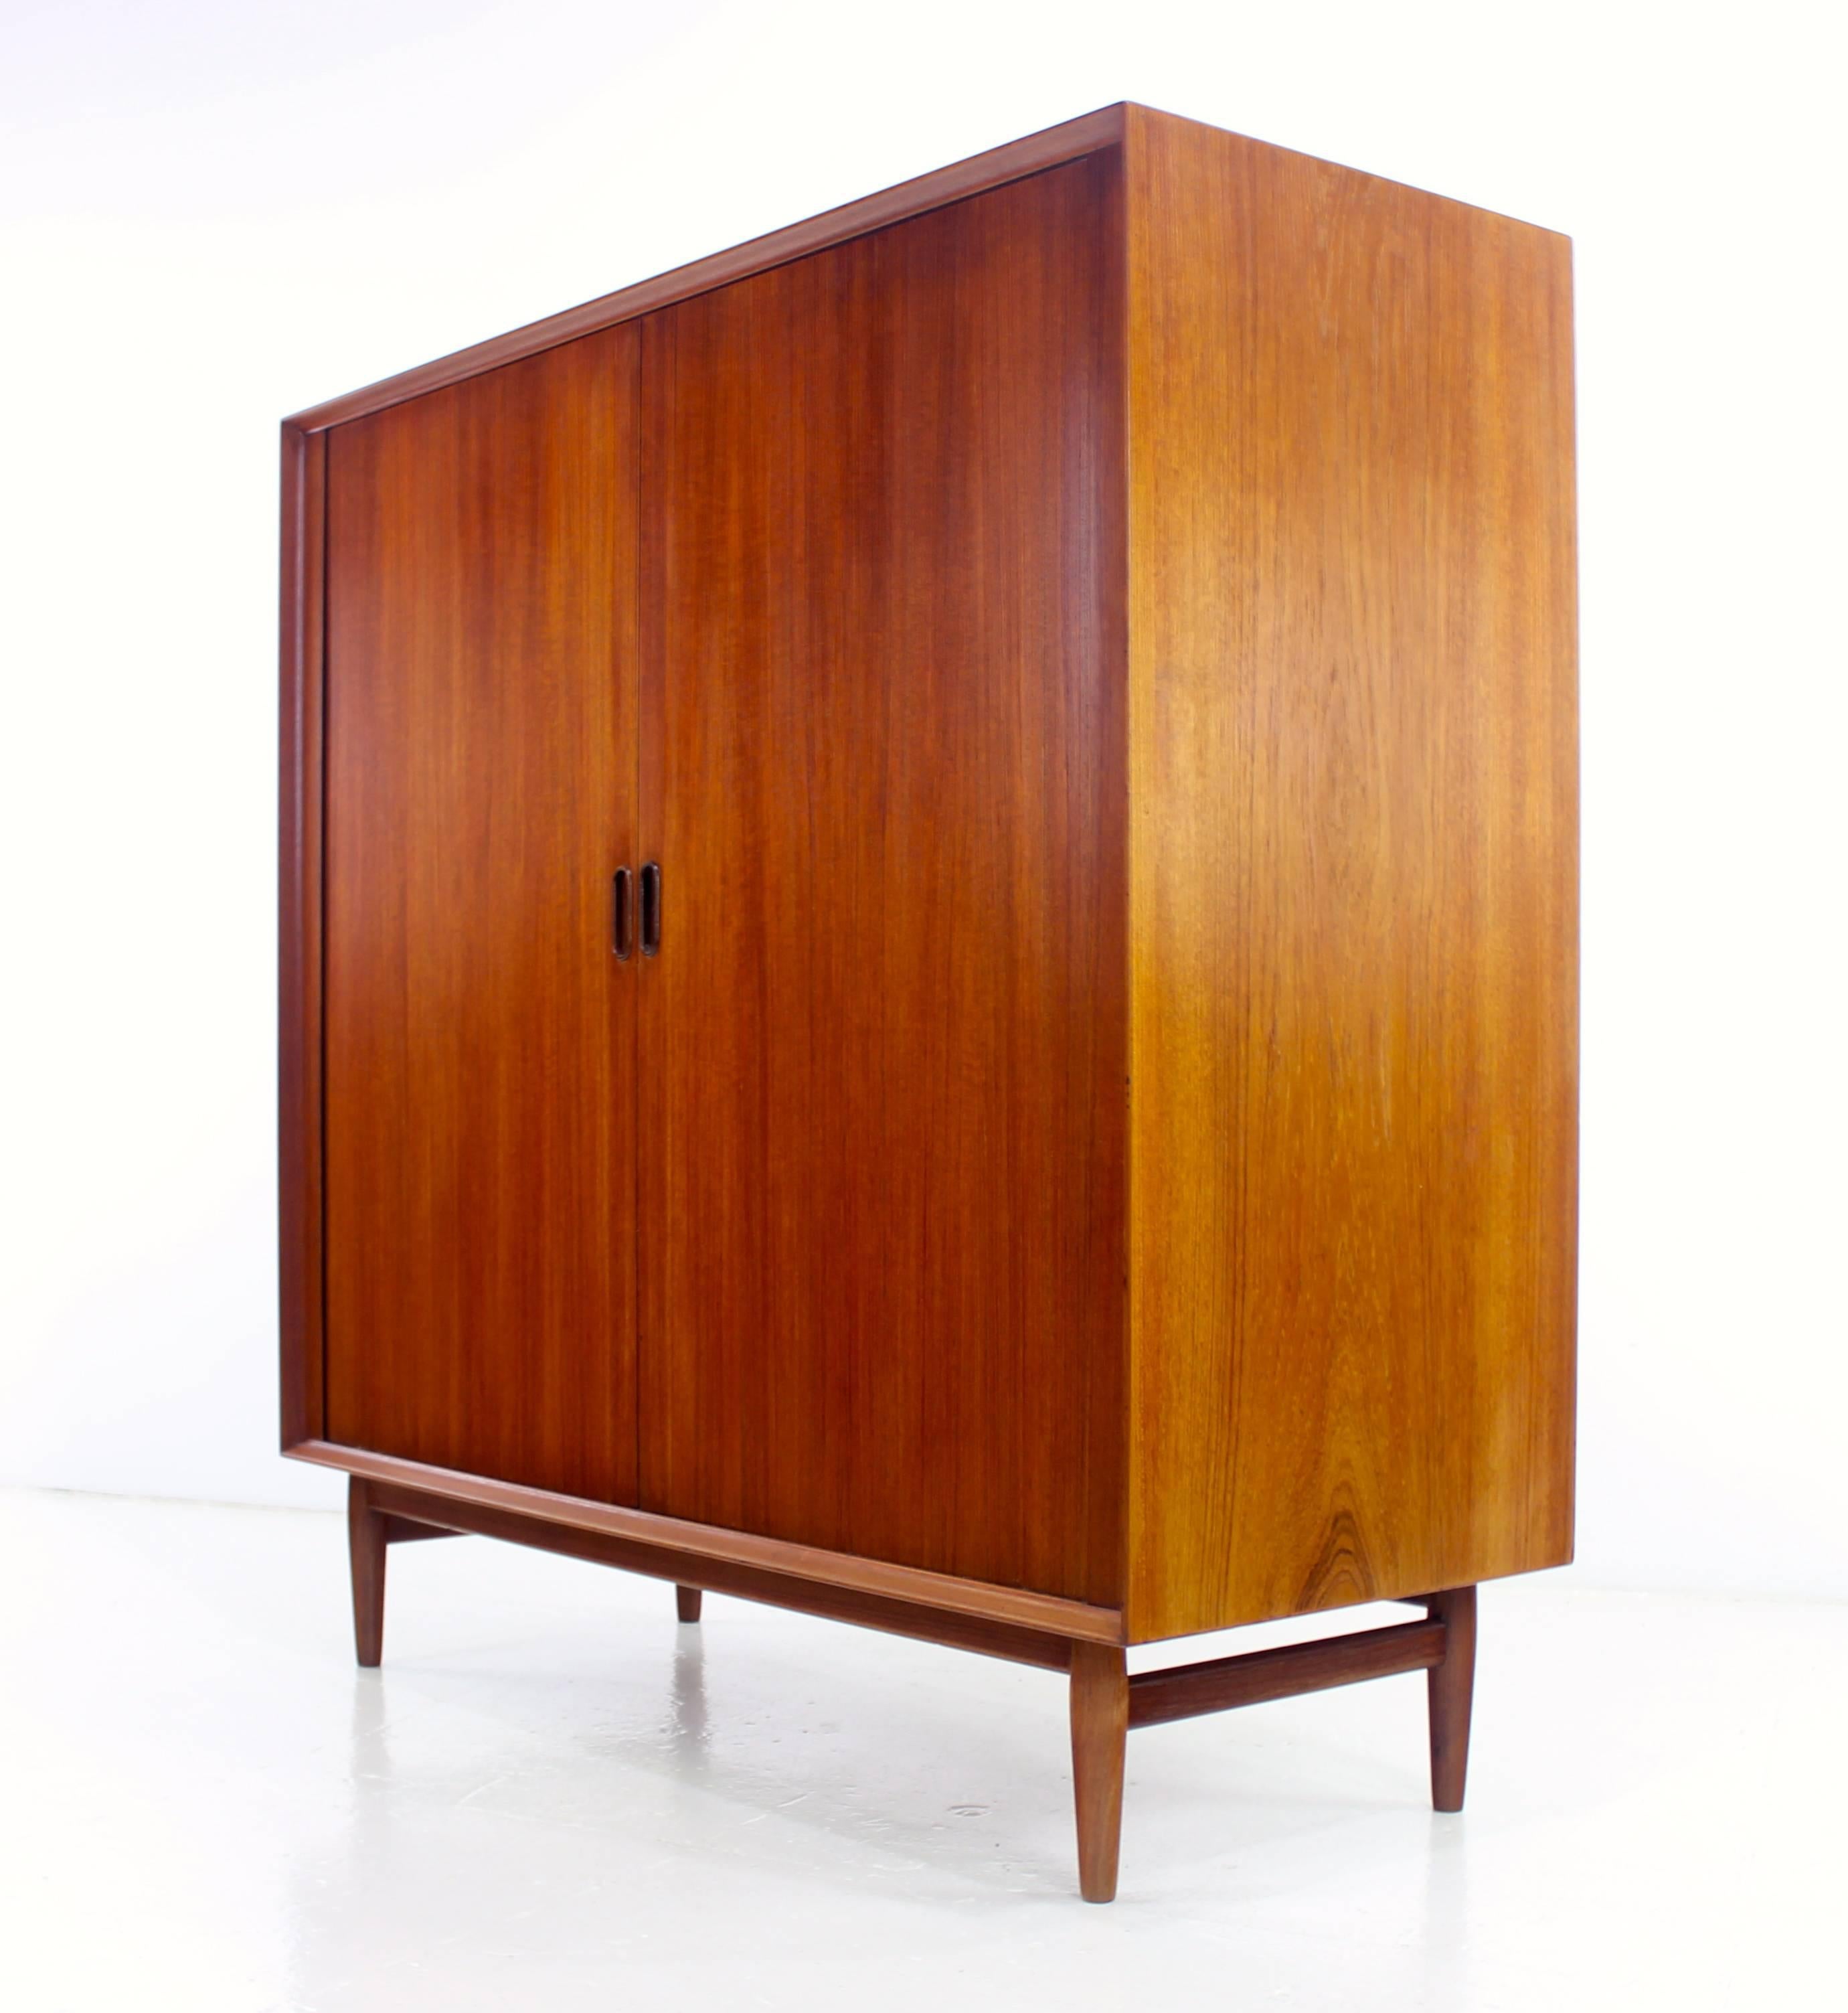 Sophisticated Danish modern gentleman's chest designed by Arne Vodder.
Richly grained teak with ultimate style and function.
Tambour doors glide open to pull-out trays on the left, two drawers and adjustable shelving on the right.
Professionally